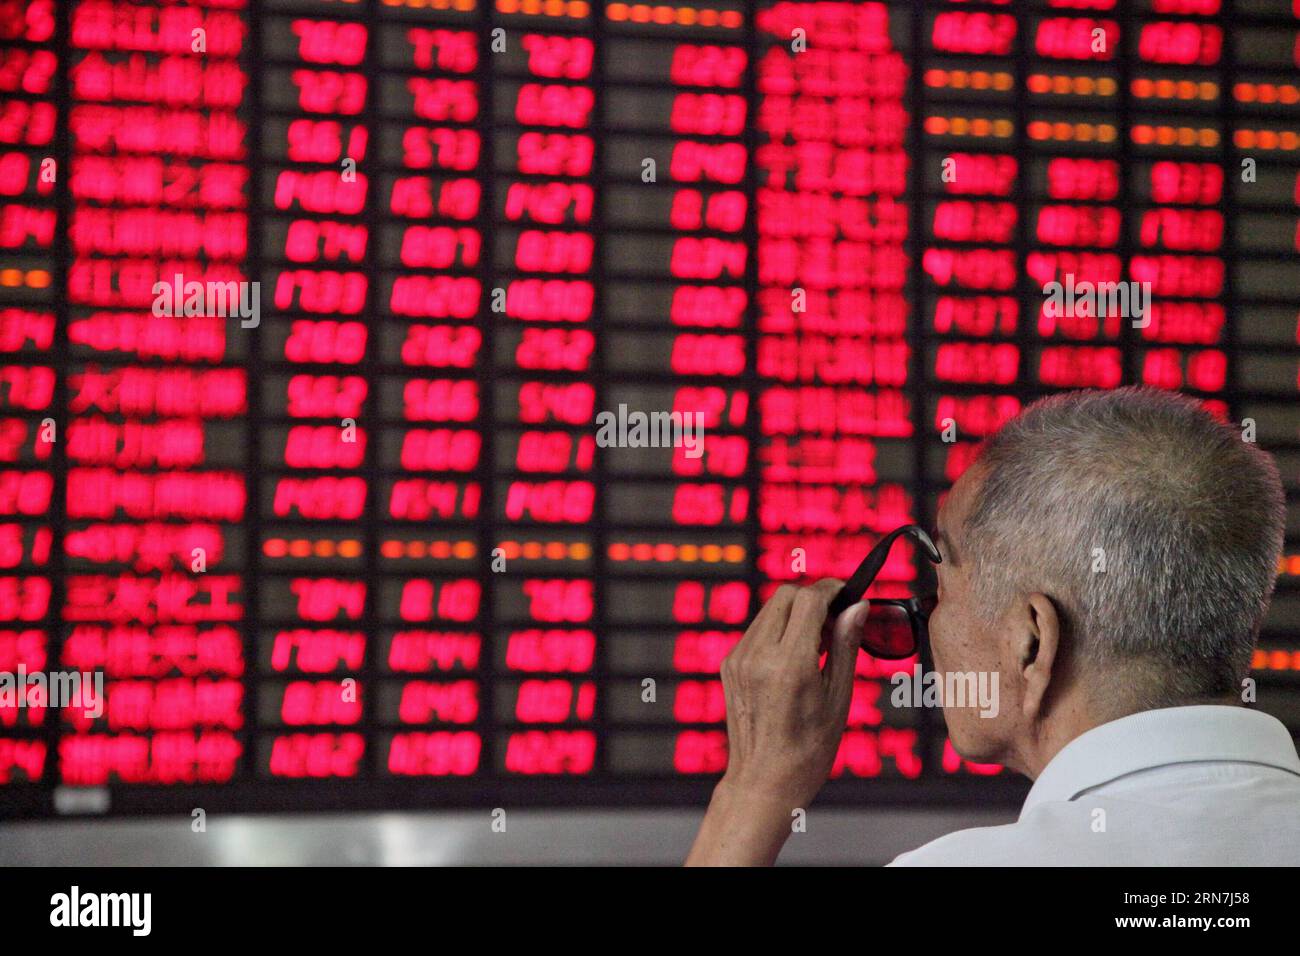 WIRTSCHAFT Börse in China (150909) -- SHANGHAI, Sept. 9, 2015 -- An investor looks through stock information at a trading hall of a securities firm in Shanghai, east China, Sept. 9, 2015. Chinese shares continued to rally on Wednesday with the benchmark Shanghai Composite Index up 2.29 percent to end at 3,243.09 points. The Shenzhen Component Index jumped 2.91 percent to close at 10,620.13 points. The ChiNext Index, which tracks China s NASDAQ-style board of growth enterprises, gained 3.53 percent to close at 2,071.72 points. ) (lfj) CHINA-STOCKS-RISE (CN) ZhuangxYi PUBLICATIONxNOTxINxCHN   Ec Stock Photo